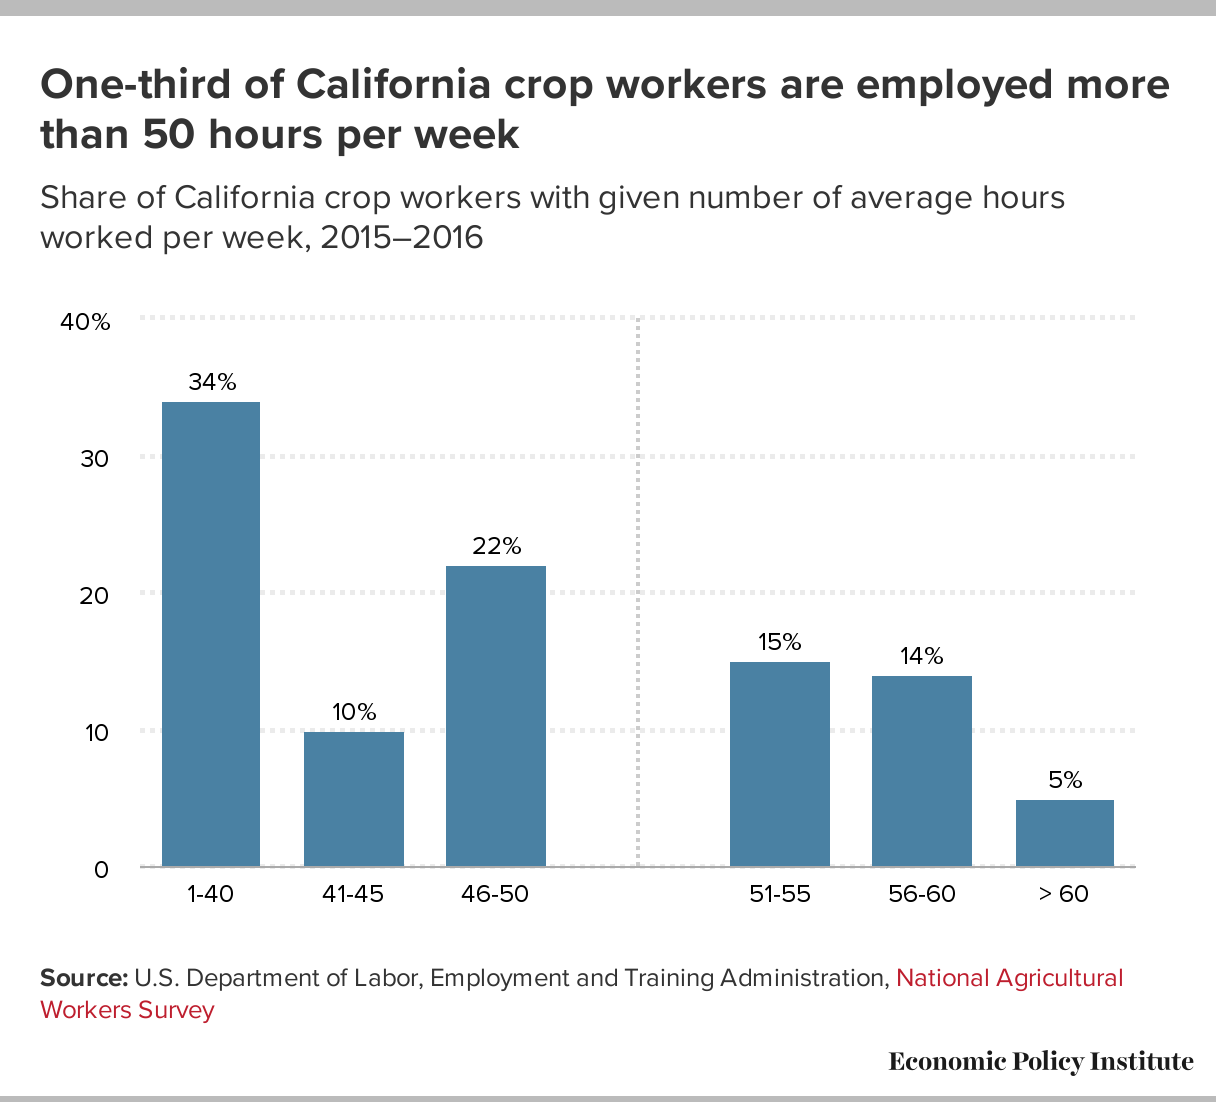 Coronavirus and farmworkers: Farm employment, safety issues, and the H-2A  guestworker program | Economic Policy Institute